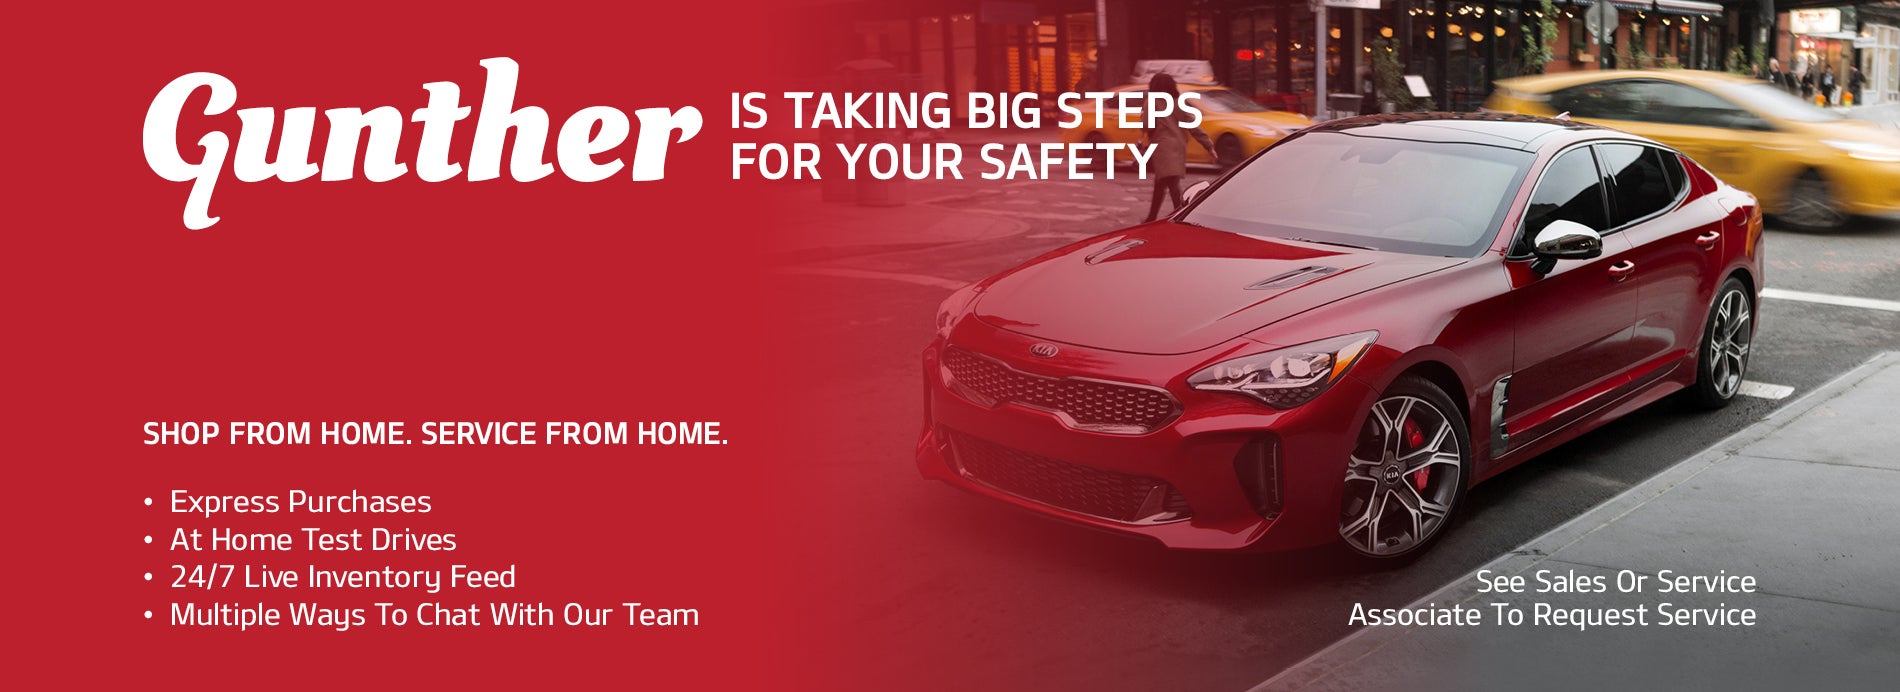 Gunther Is Taking Big Steps For Your Safety. Shop From Home. Service From Home. Express Purchases, At Home Test Drives, 24/7 Live Inventory Feed, Multiple Ways To Chat With Our Team. See Sales Or Service Associate To Request Service.